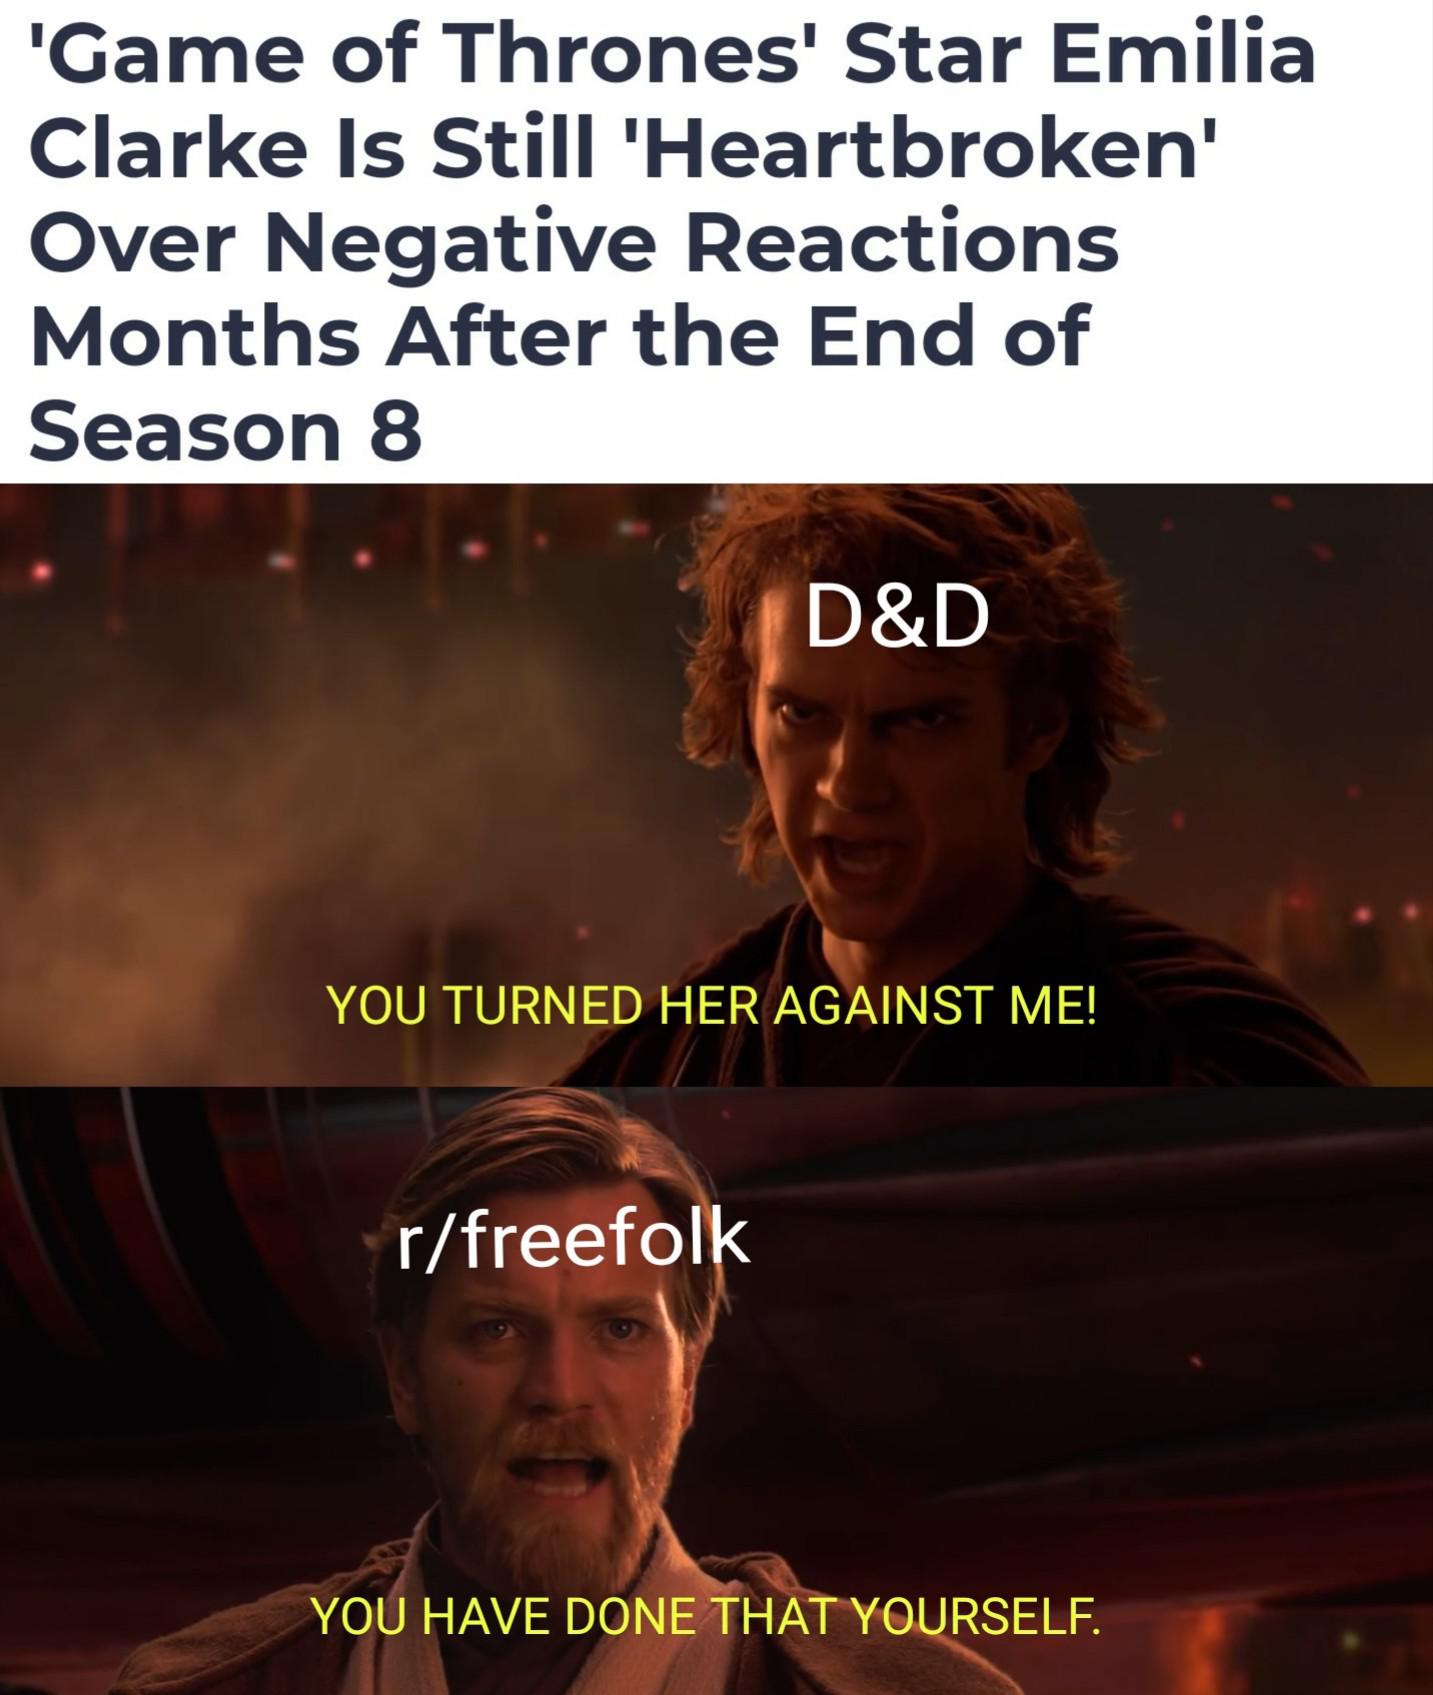 d-n-d game-of-thrones-memes d-n-d text: 'Game of Thronesl Star Emilia Clarke Is Still IHeartbrokenI Over Negative Reactions Months After the End of Season 8 YOU TURNED HER AGAINST ME! r/freefol YOU HAVE DONE THA O RSELF. 